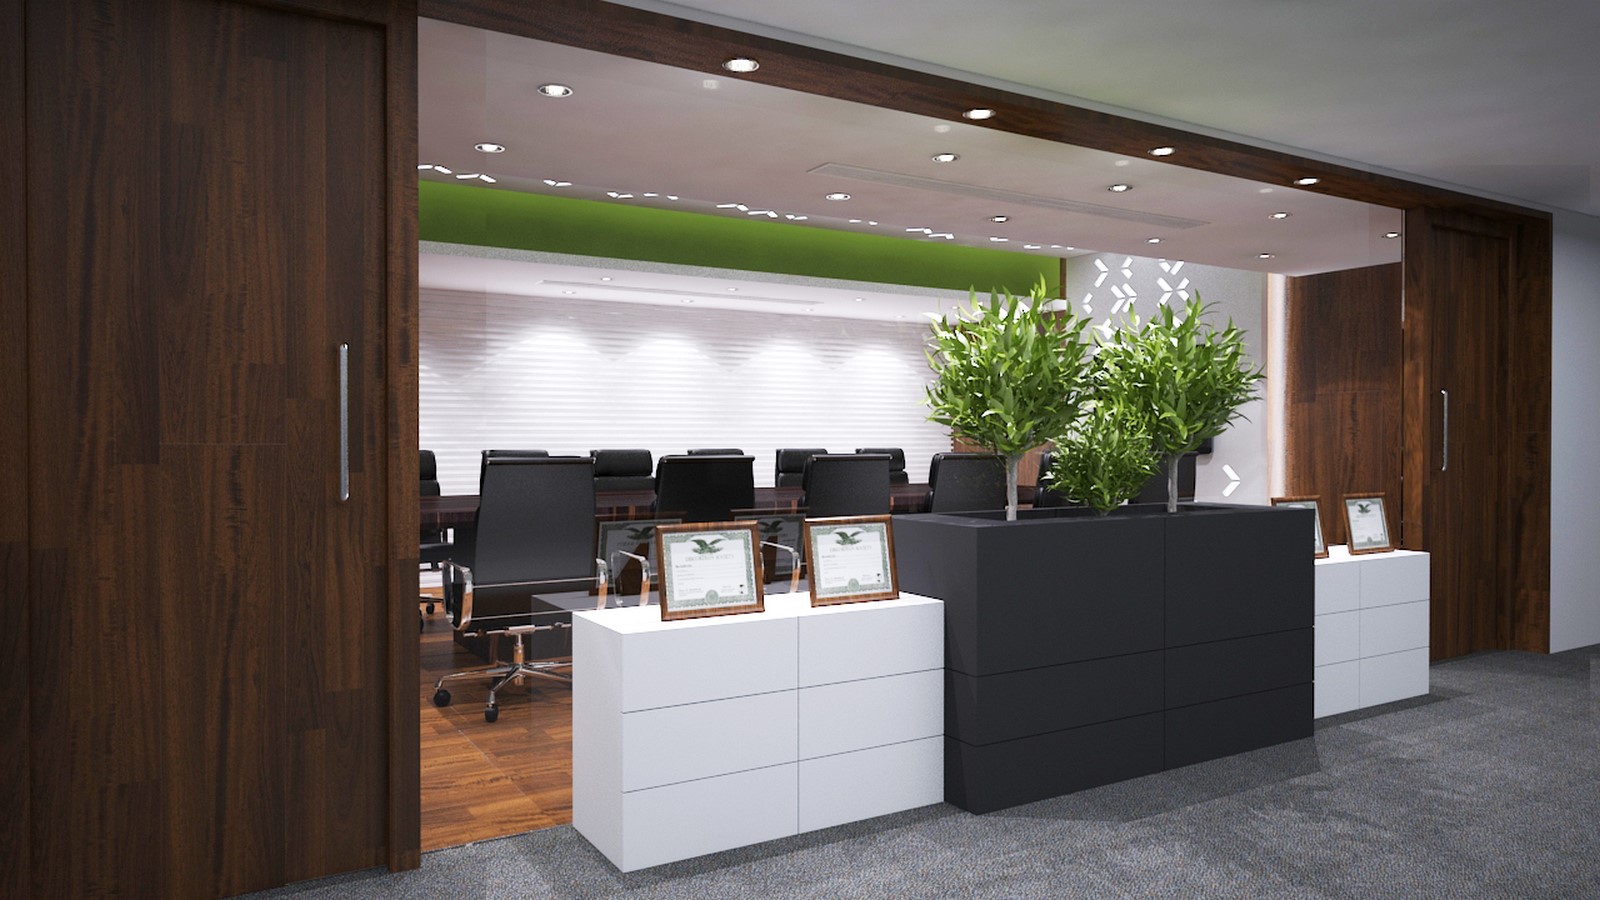 Sustainable Office Design Eco-Friendly Solutions for Energy Efficiency and Environmental Resp-Sheet2